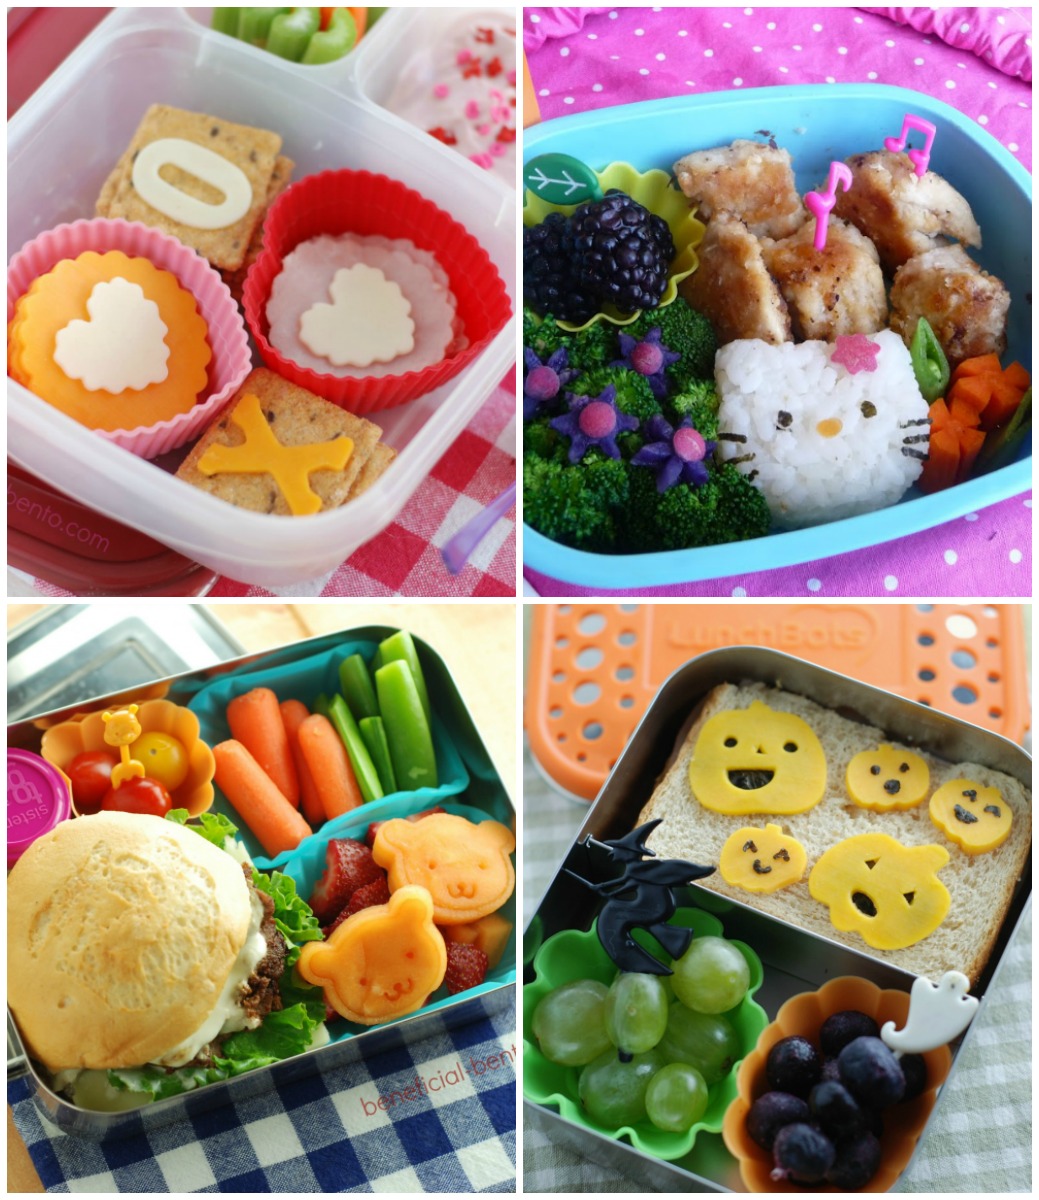 How To Make A Successful Bento Box - Downshiftology